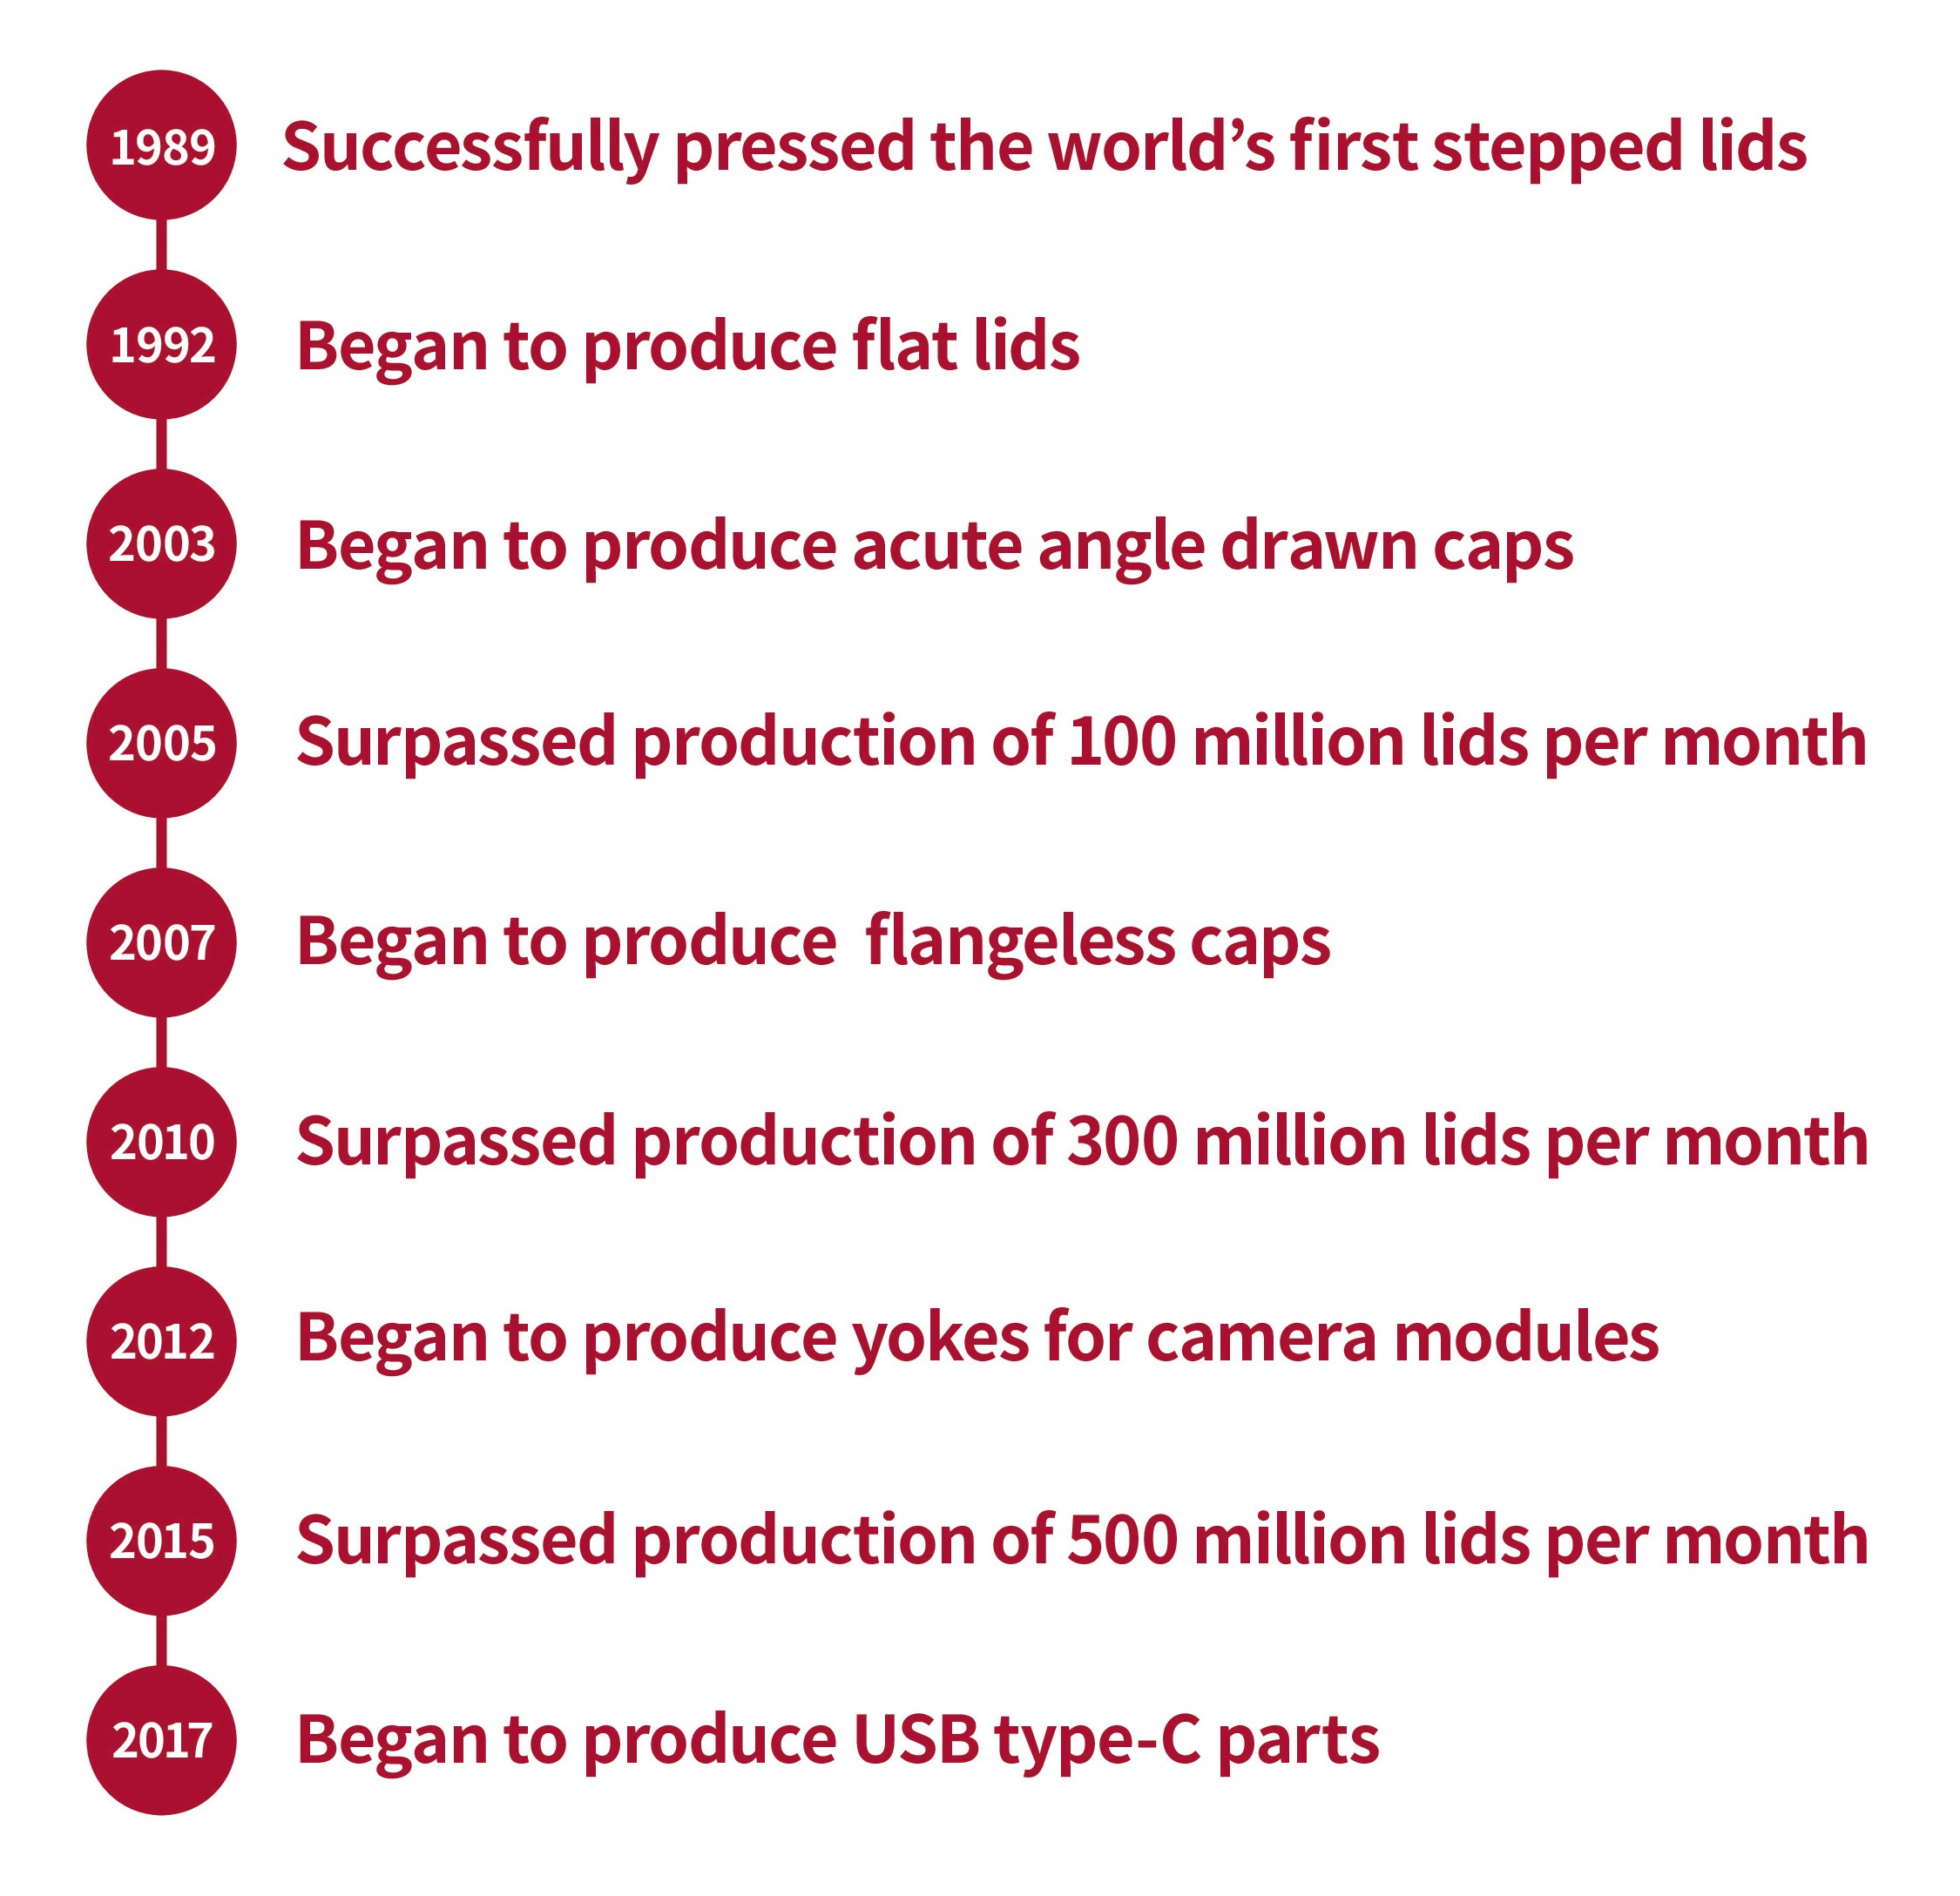 1989 Successfully pressed the world’s first stepped lids 1992 Began to produce flat lids 2003 Began to produce acute angle drawn caps 2005 Surpassed production of 100 million lids per month 2007年:フランジレスCAPの生産開始。2010年：LID月産3億個突破。2012 Began to produce yokes for camera modules 2015 Surpassed production of 500 million lids per month 2017 Began to produce USB type-C parts 